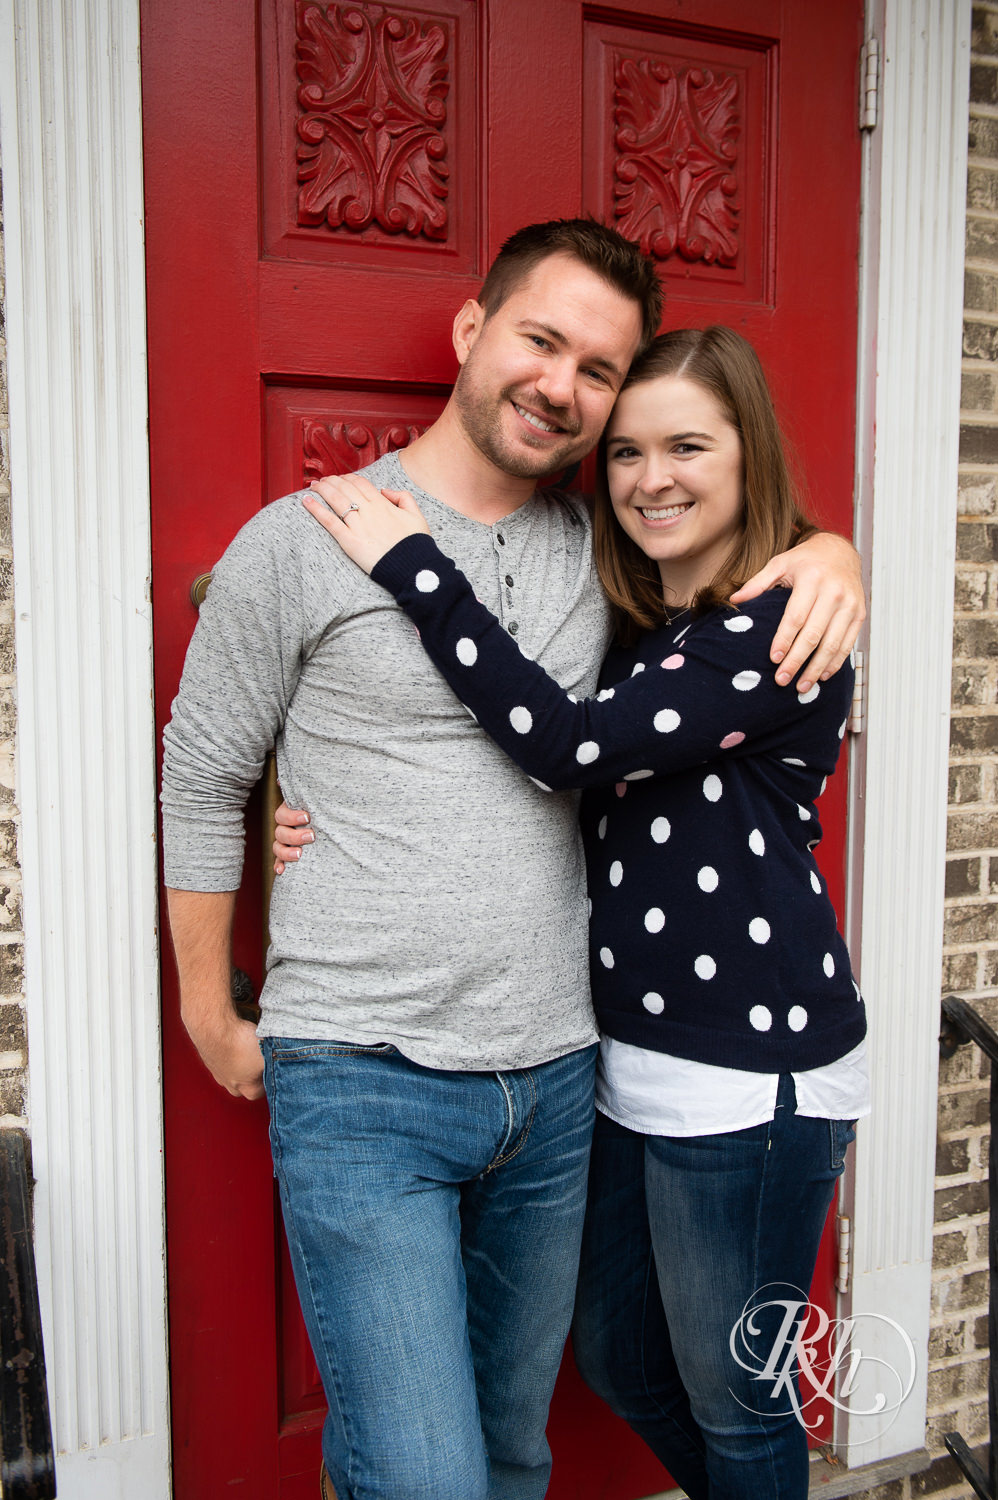 Man and woman smile against red door on rainy day in Excelsior, Minnesota.